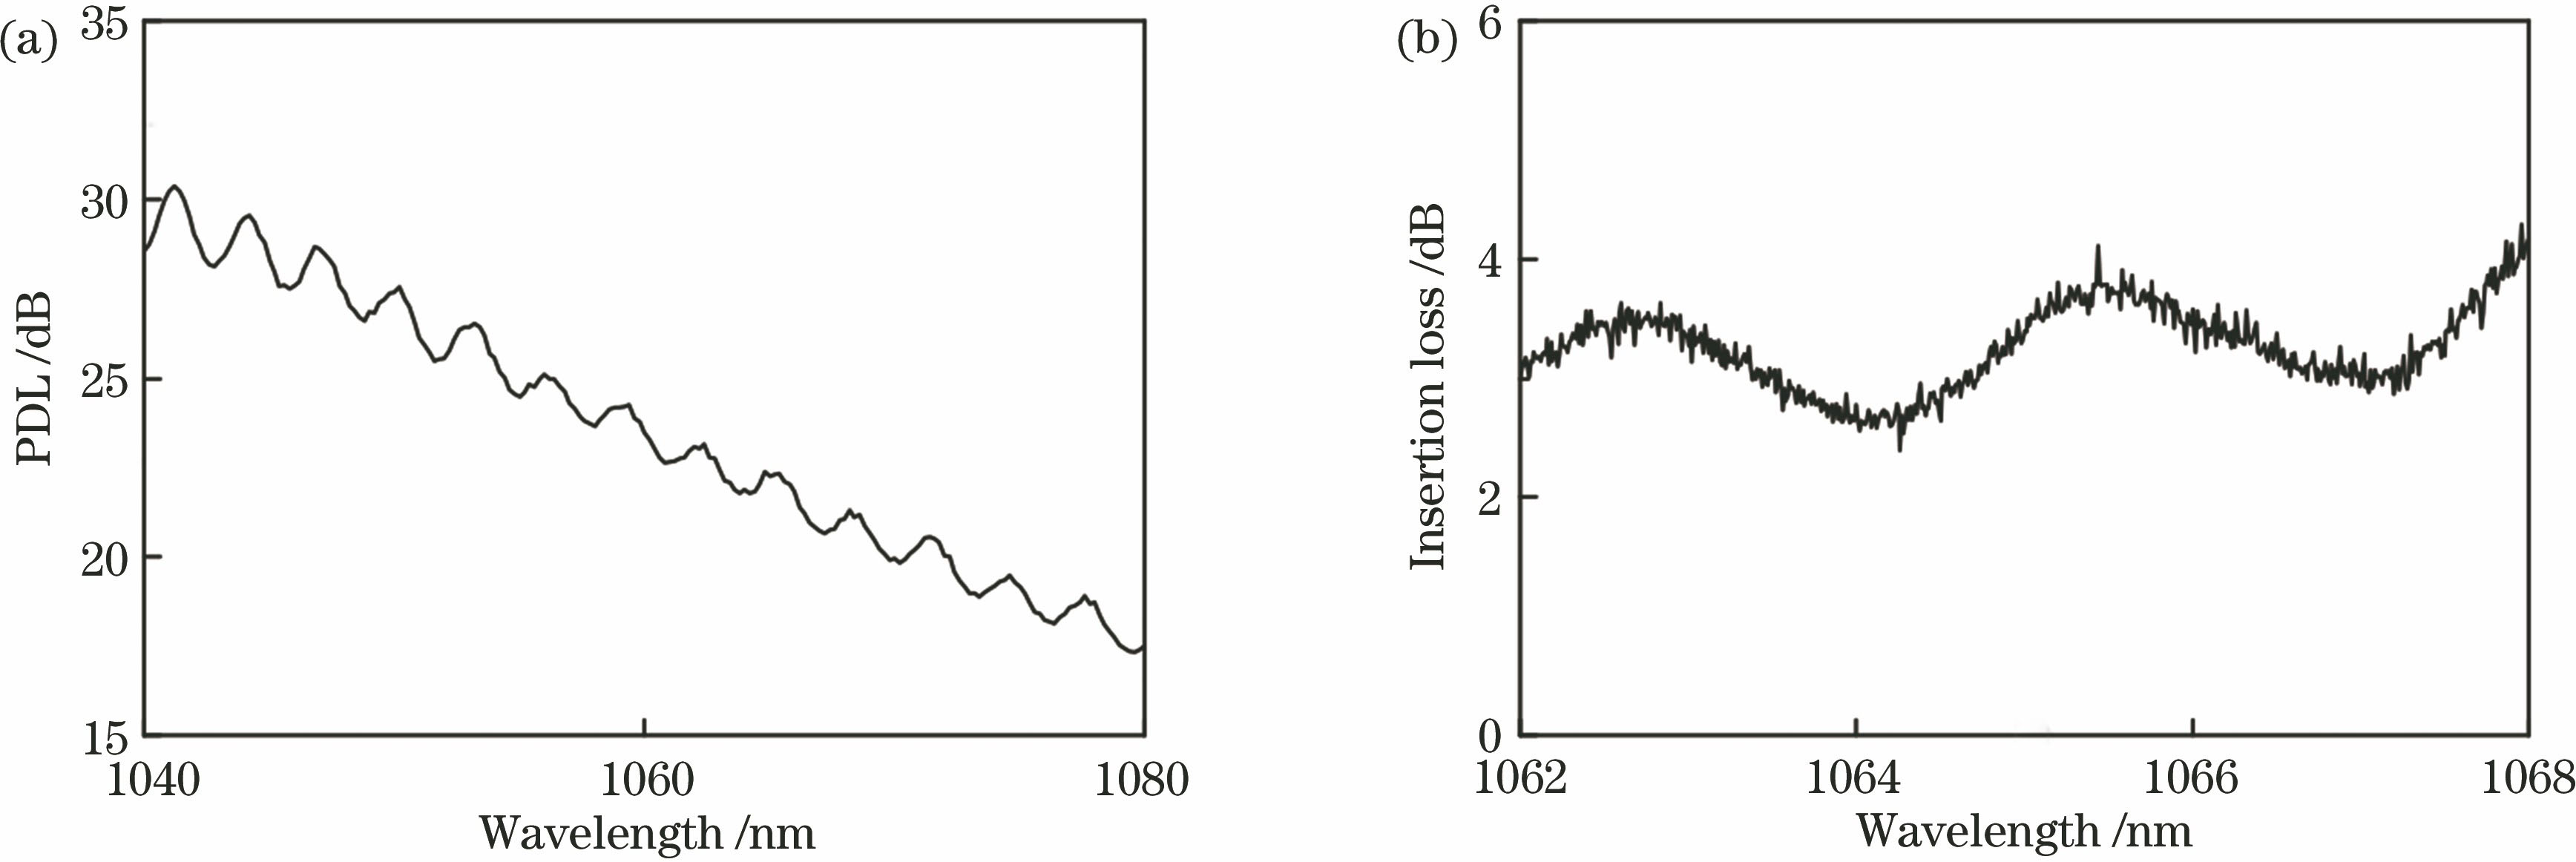 Spectral characteristics of 45°TFG. (a) PDL spectrum; (b) insertion loss spectrum